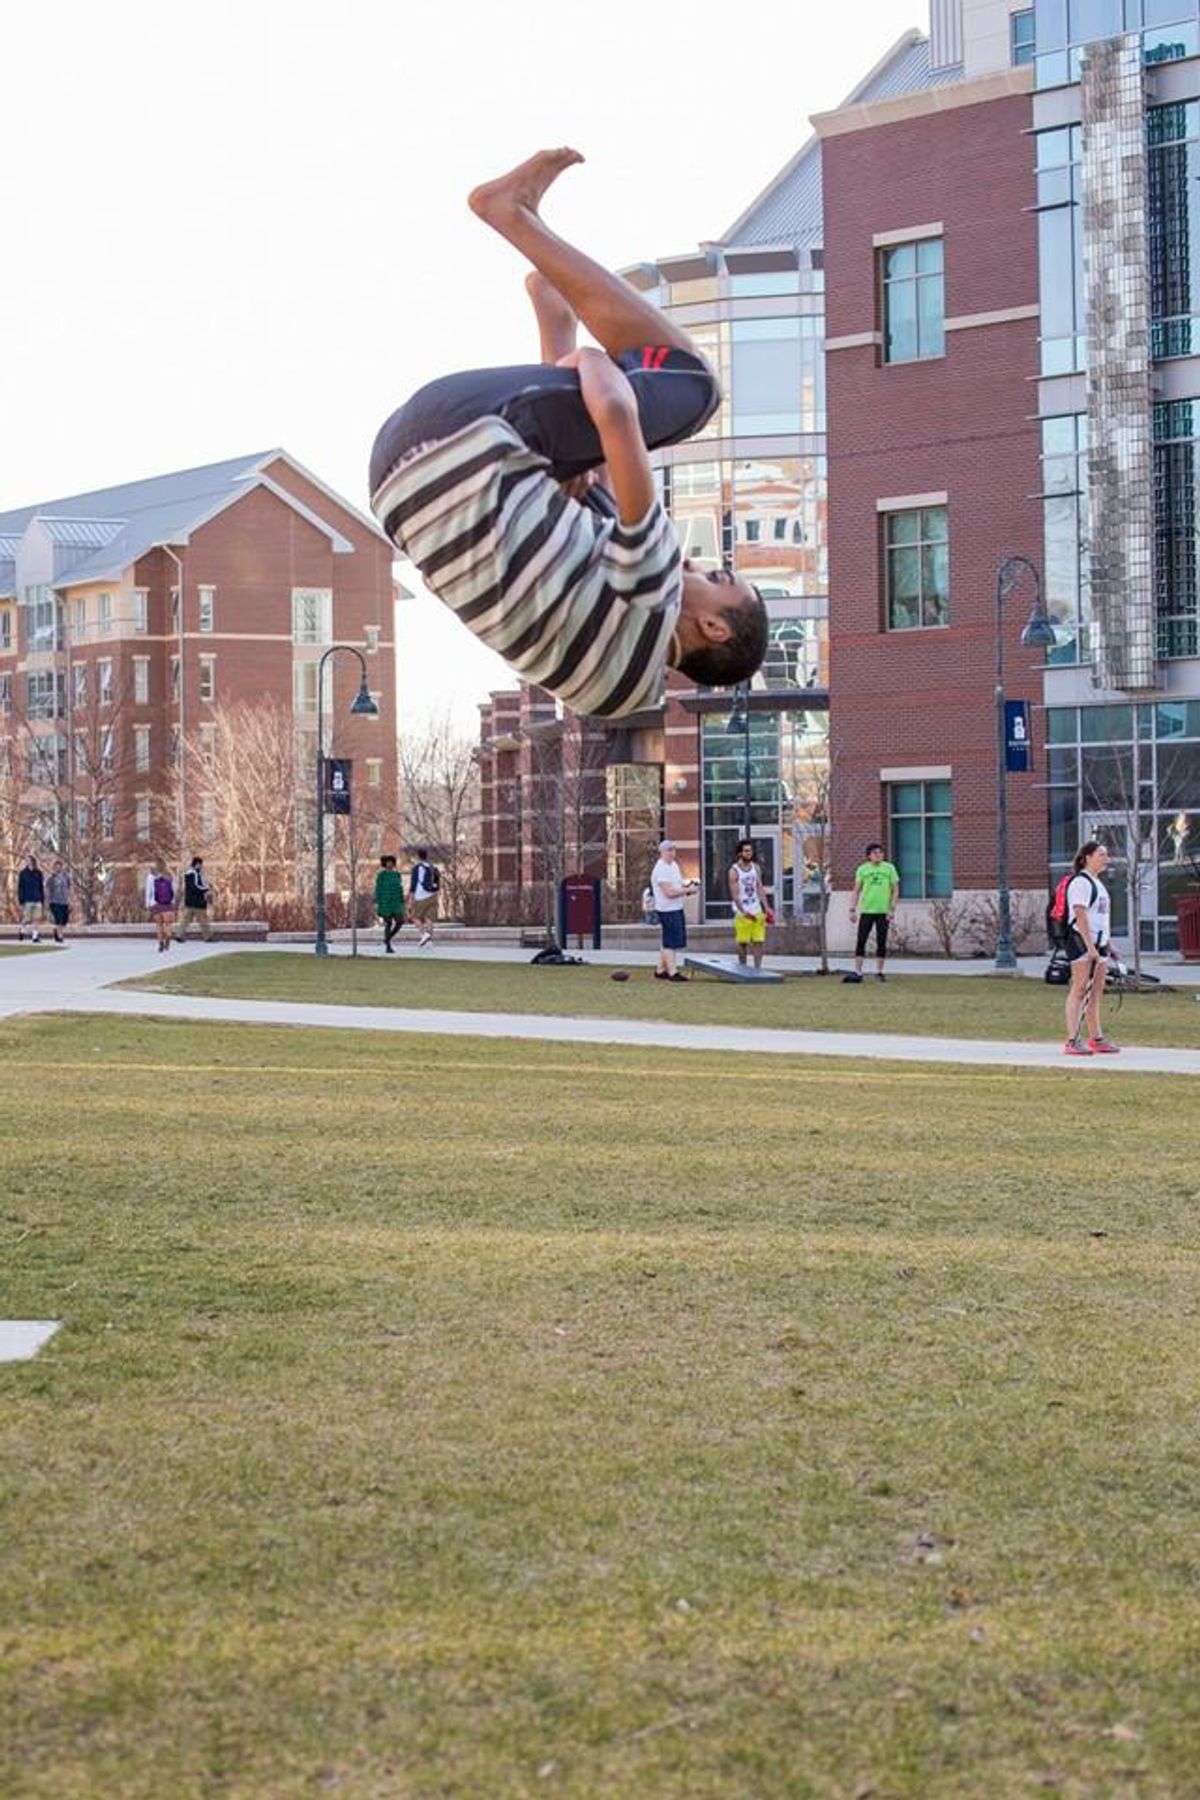 11 Enlightening Facts about Parkour and Freerunning